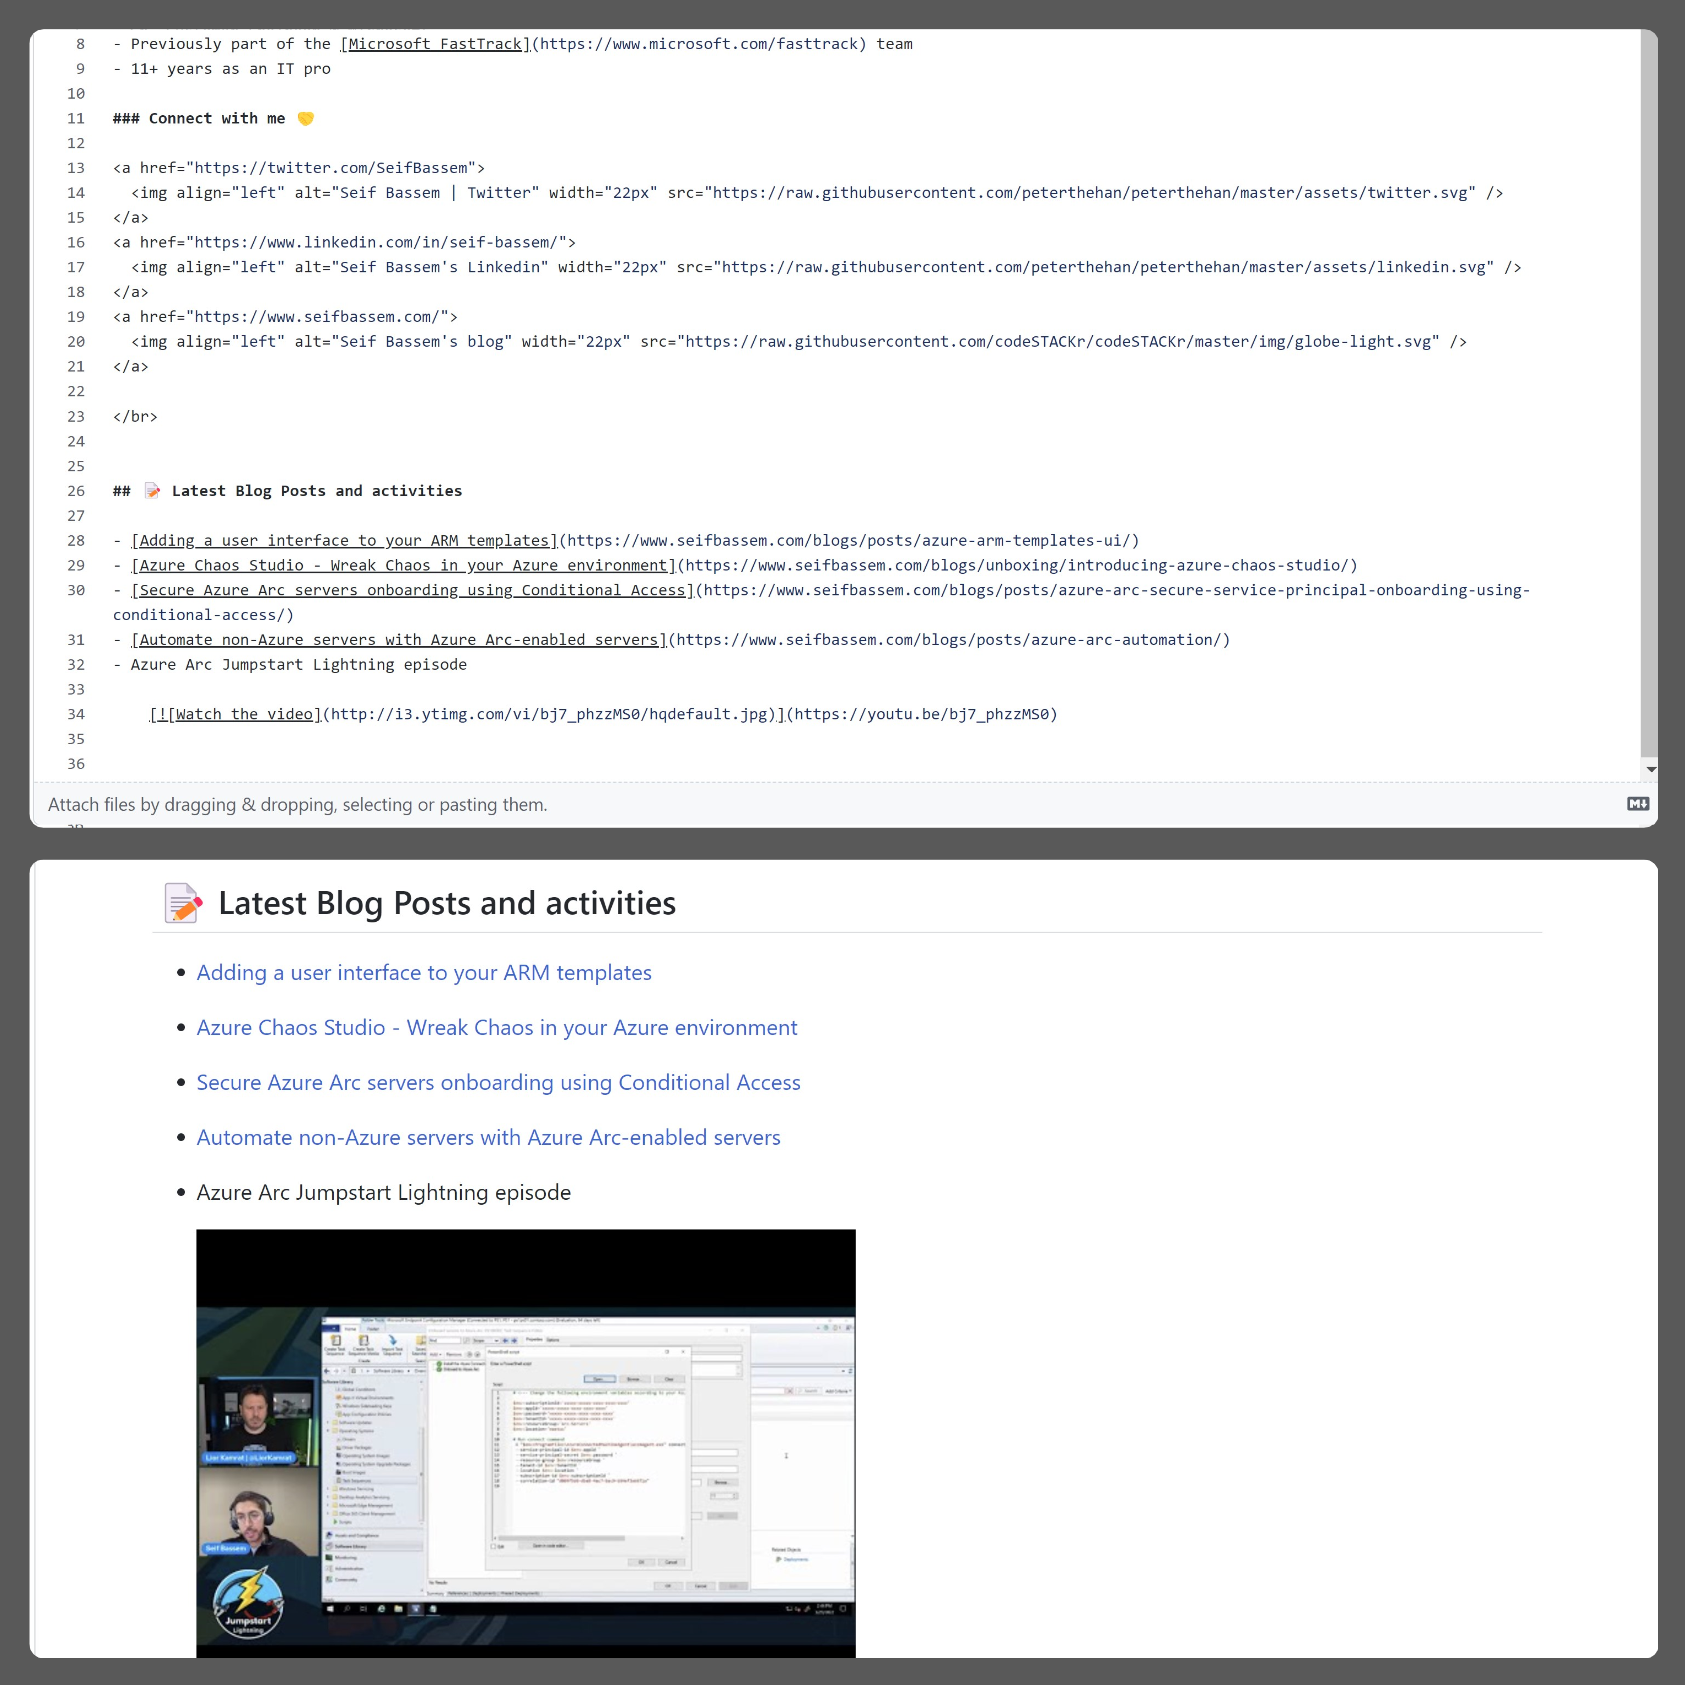 Screenshot showing the recent blog posts and activities markdown